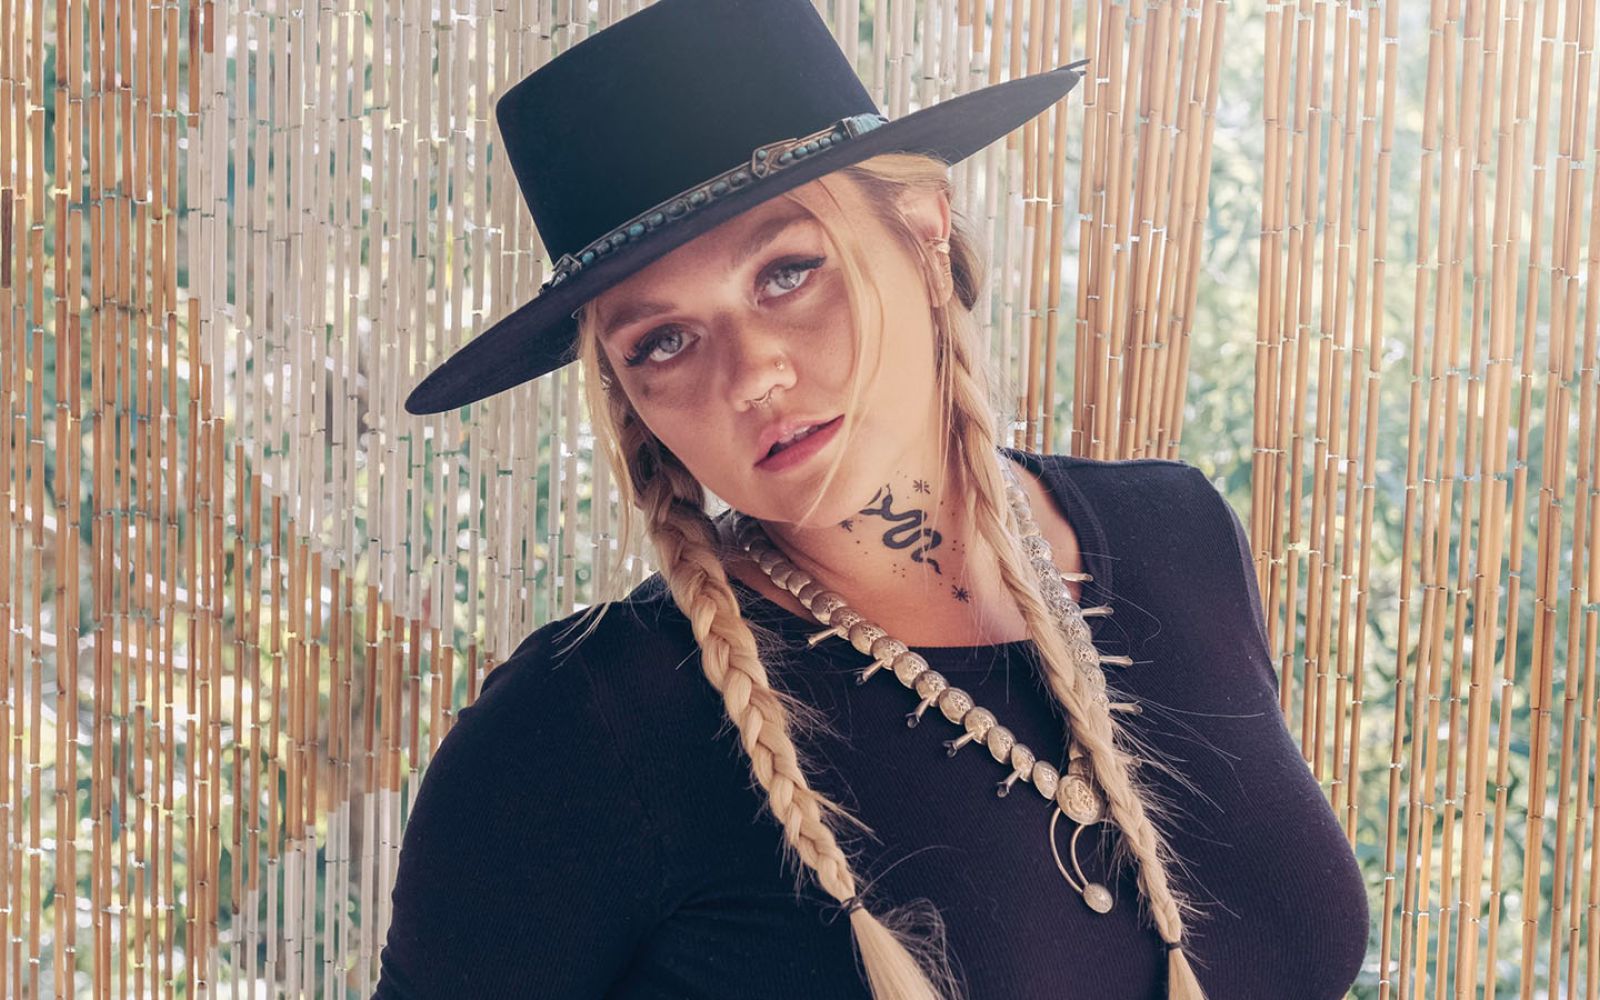 Country artist Elle King will perform at The Clyde Theatre on Thursday, Sept. 5.